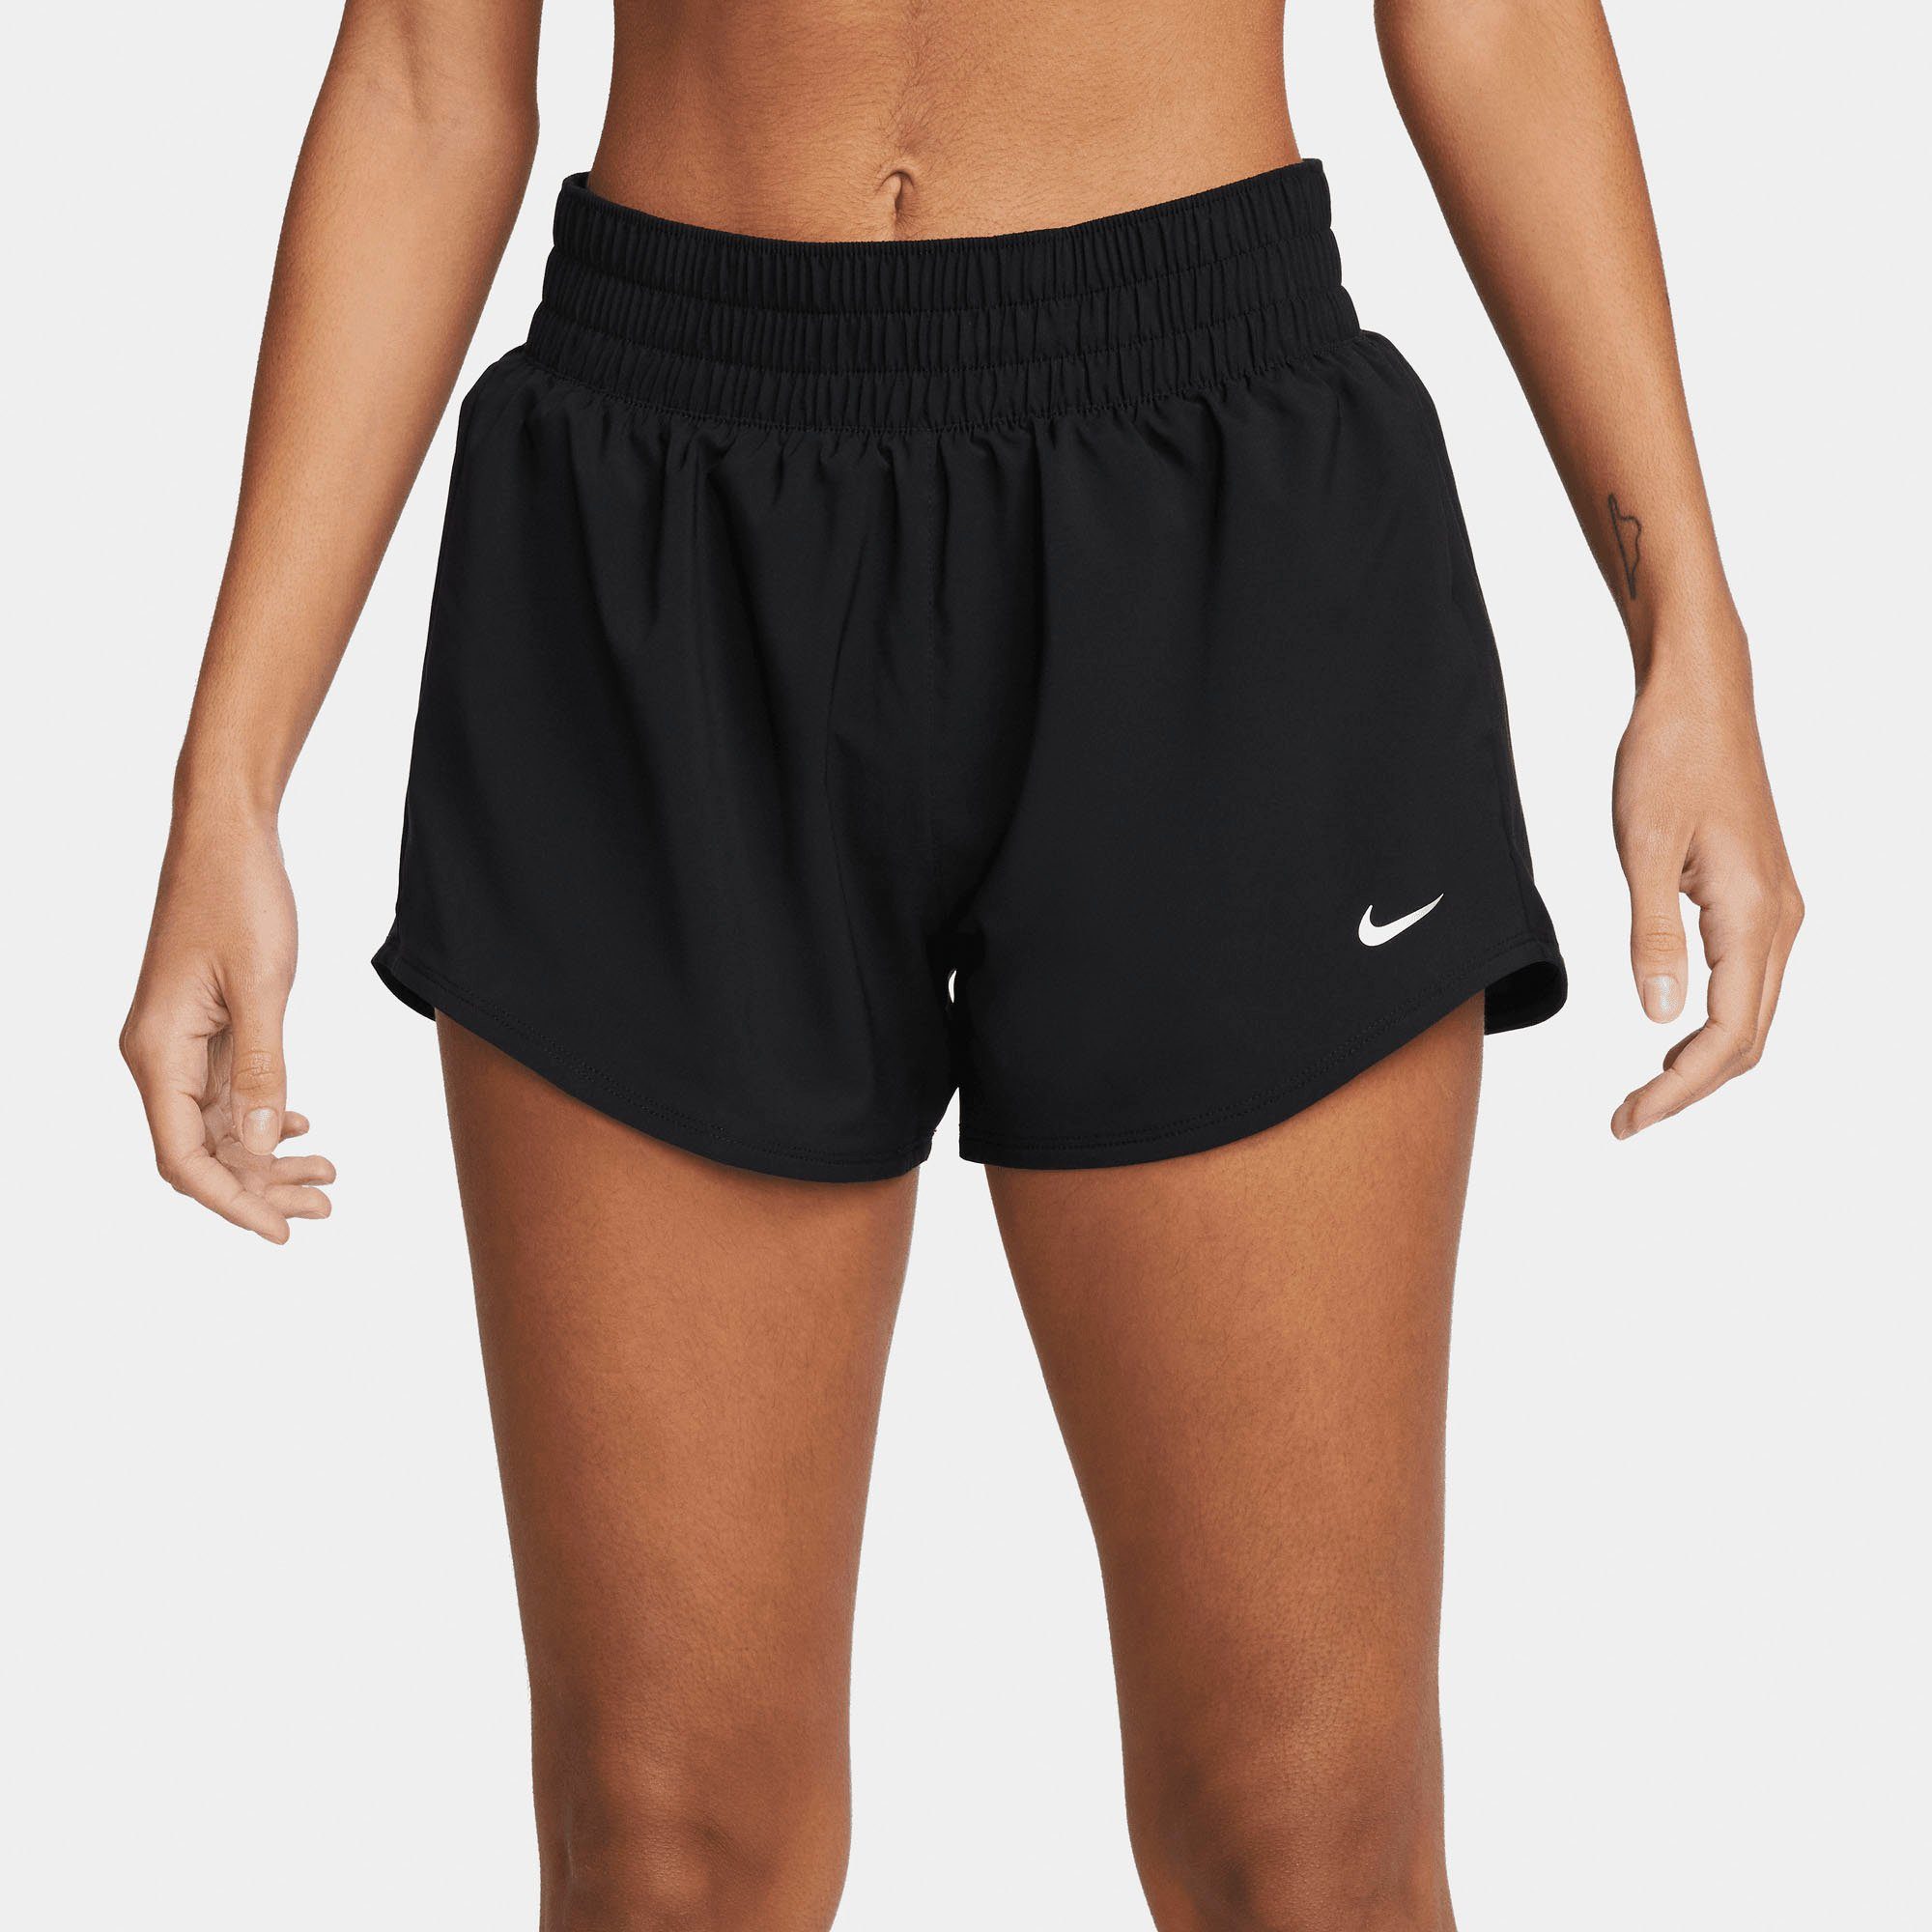 Nike Trainingsshorts ONE BLACK/REFLECTIVE WOMEN'S MID-RISE SILV SHORTS BRIEF-LINED DRI-FIT